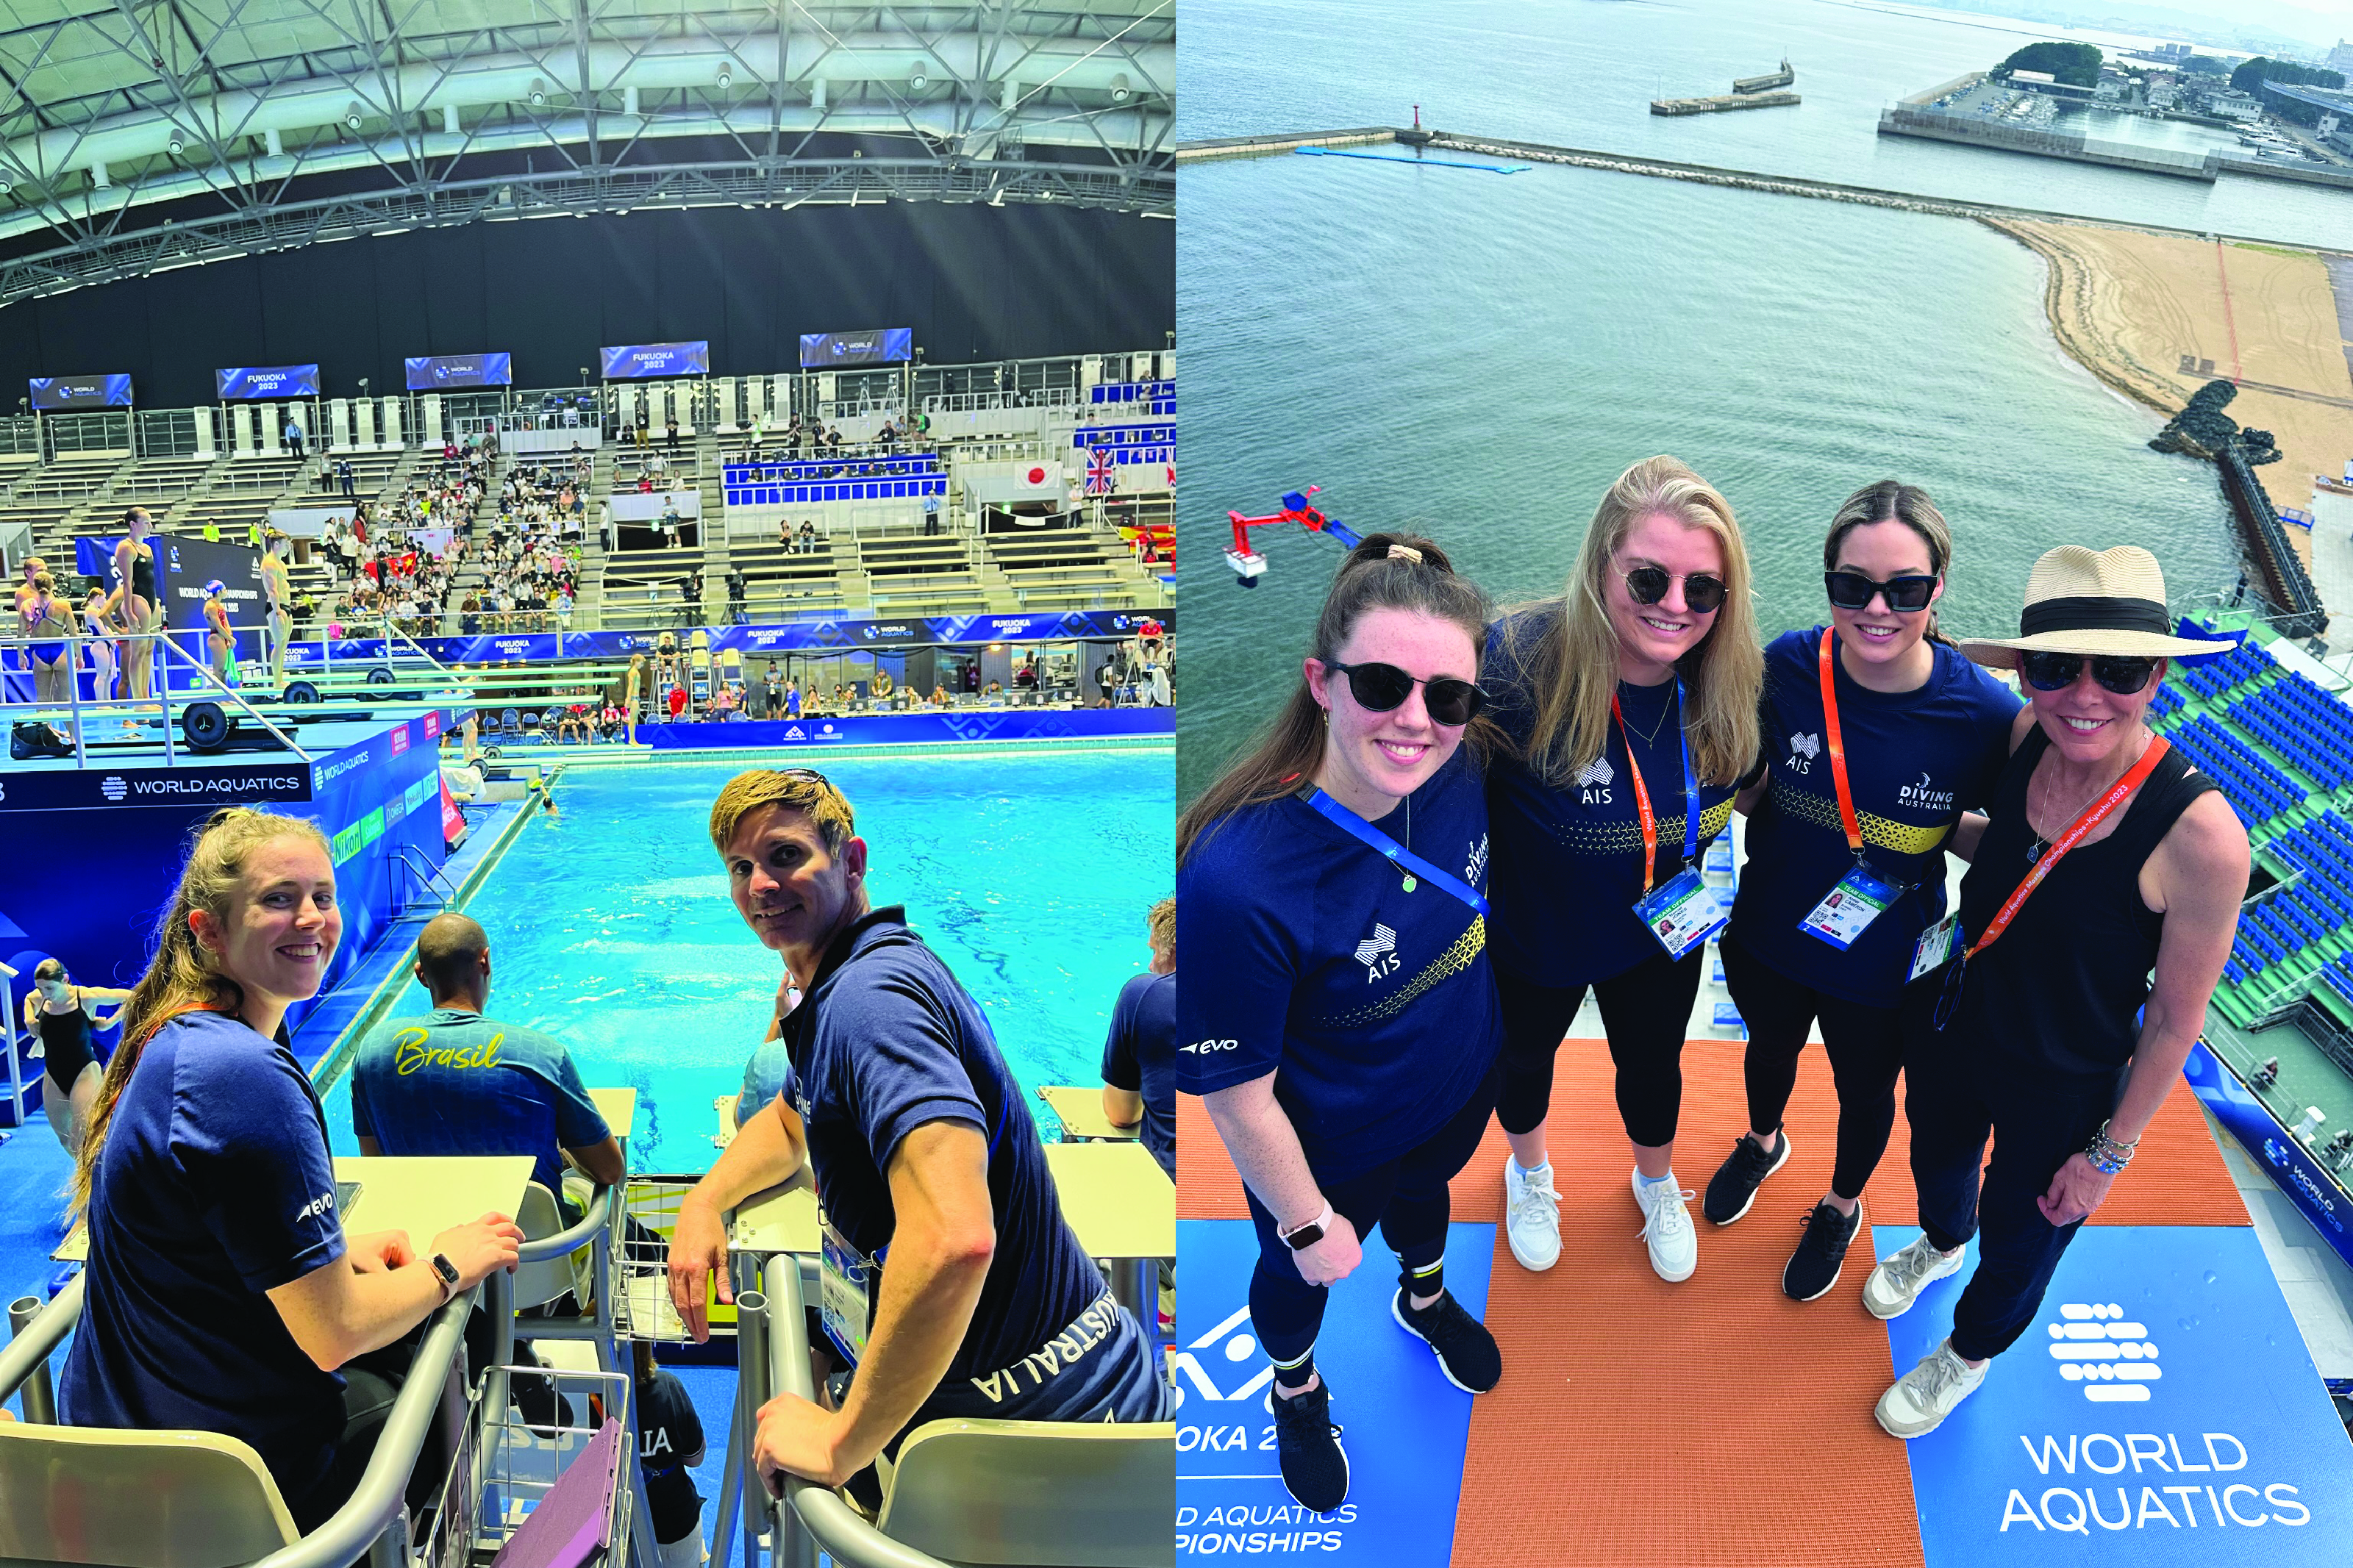 2 photo collage. Image 1 is Emma Lynch and her coach inside diving champs. Image 2 is Emma Lynch and 3 other coaches standing on top of diving board outside.